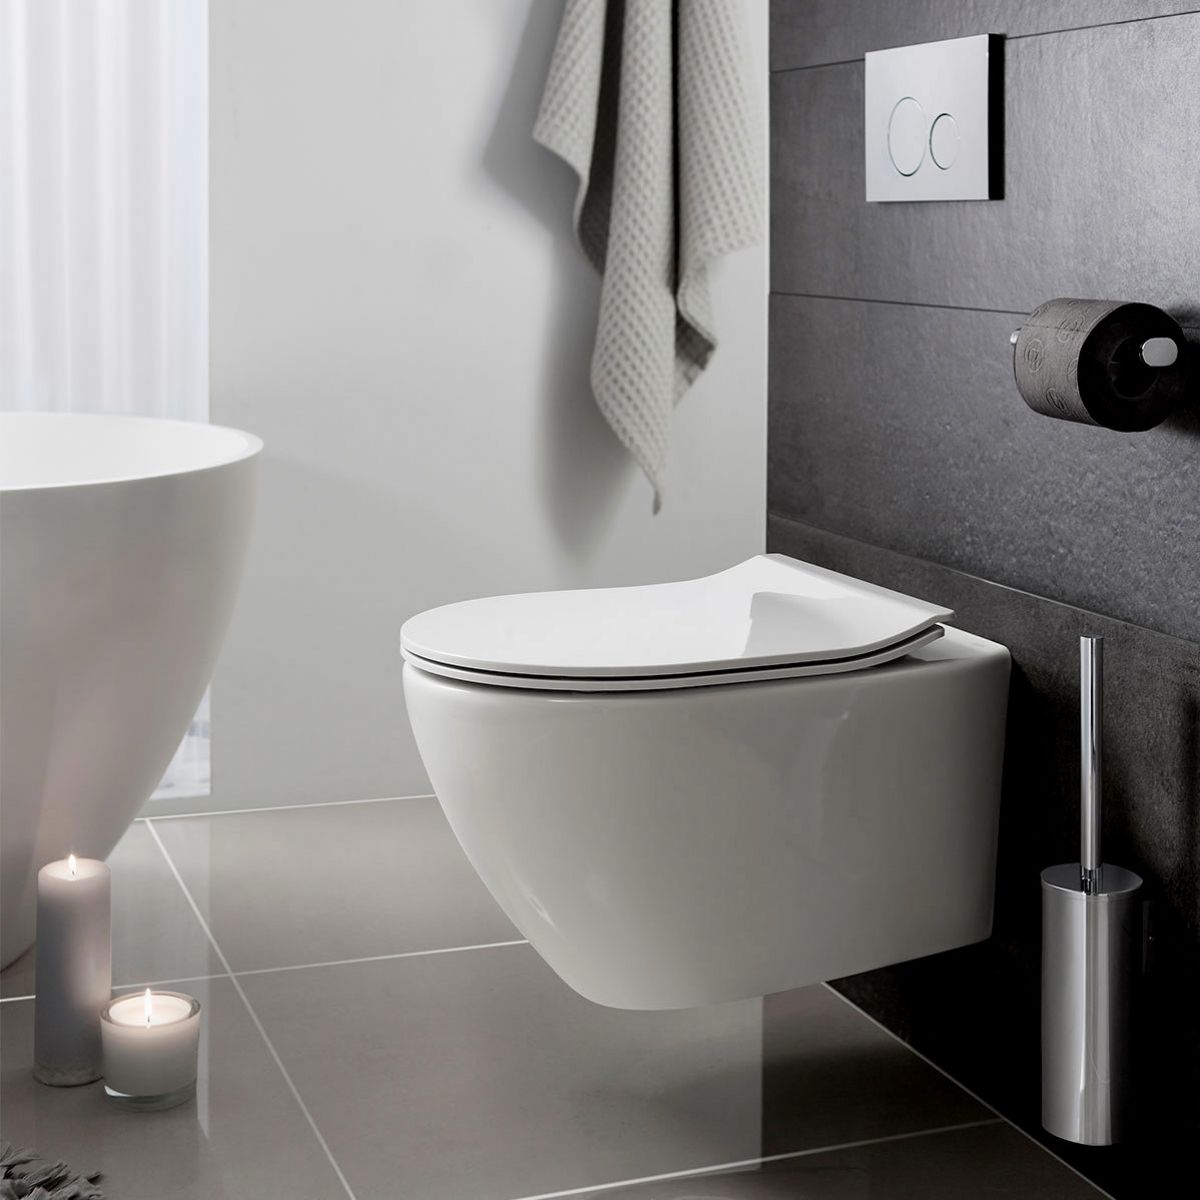 Why Need Smart Toilet for Your Bathroom